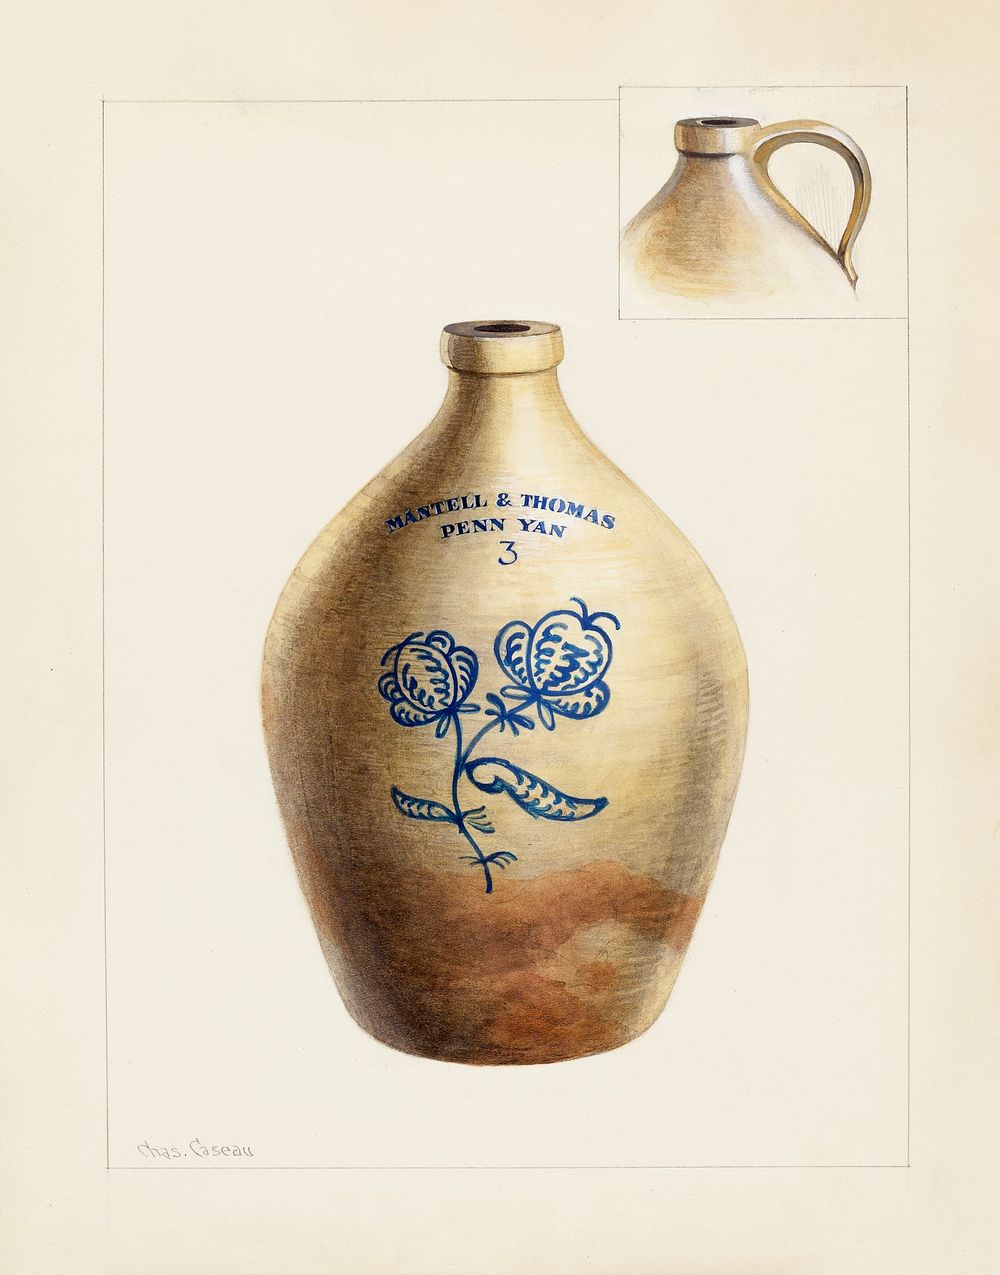 Jug (ca. 1937) by Charles Caseau. Original from The National Gallery of Art. Digitally enhanced by rawpixel.